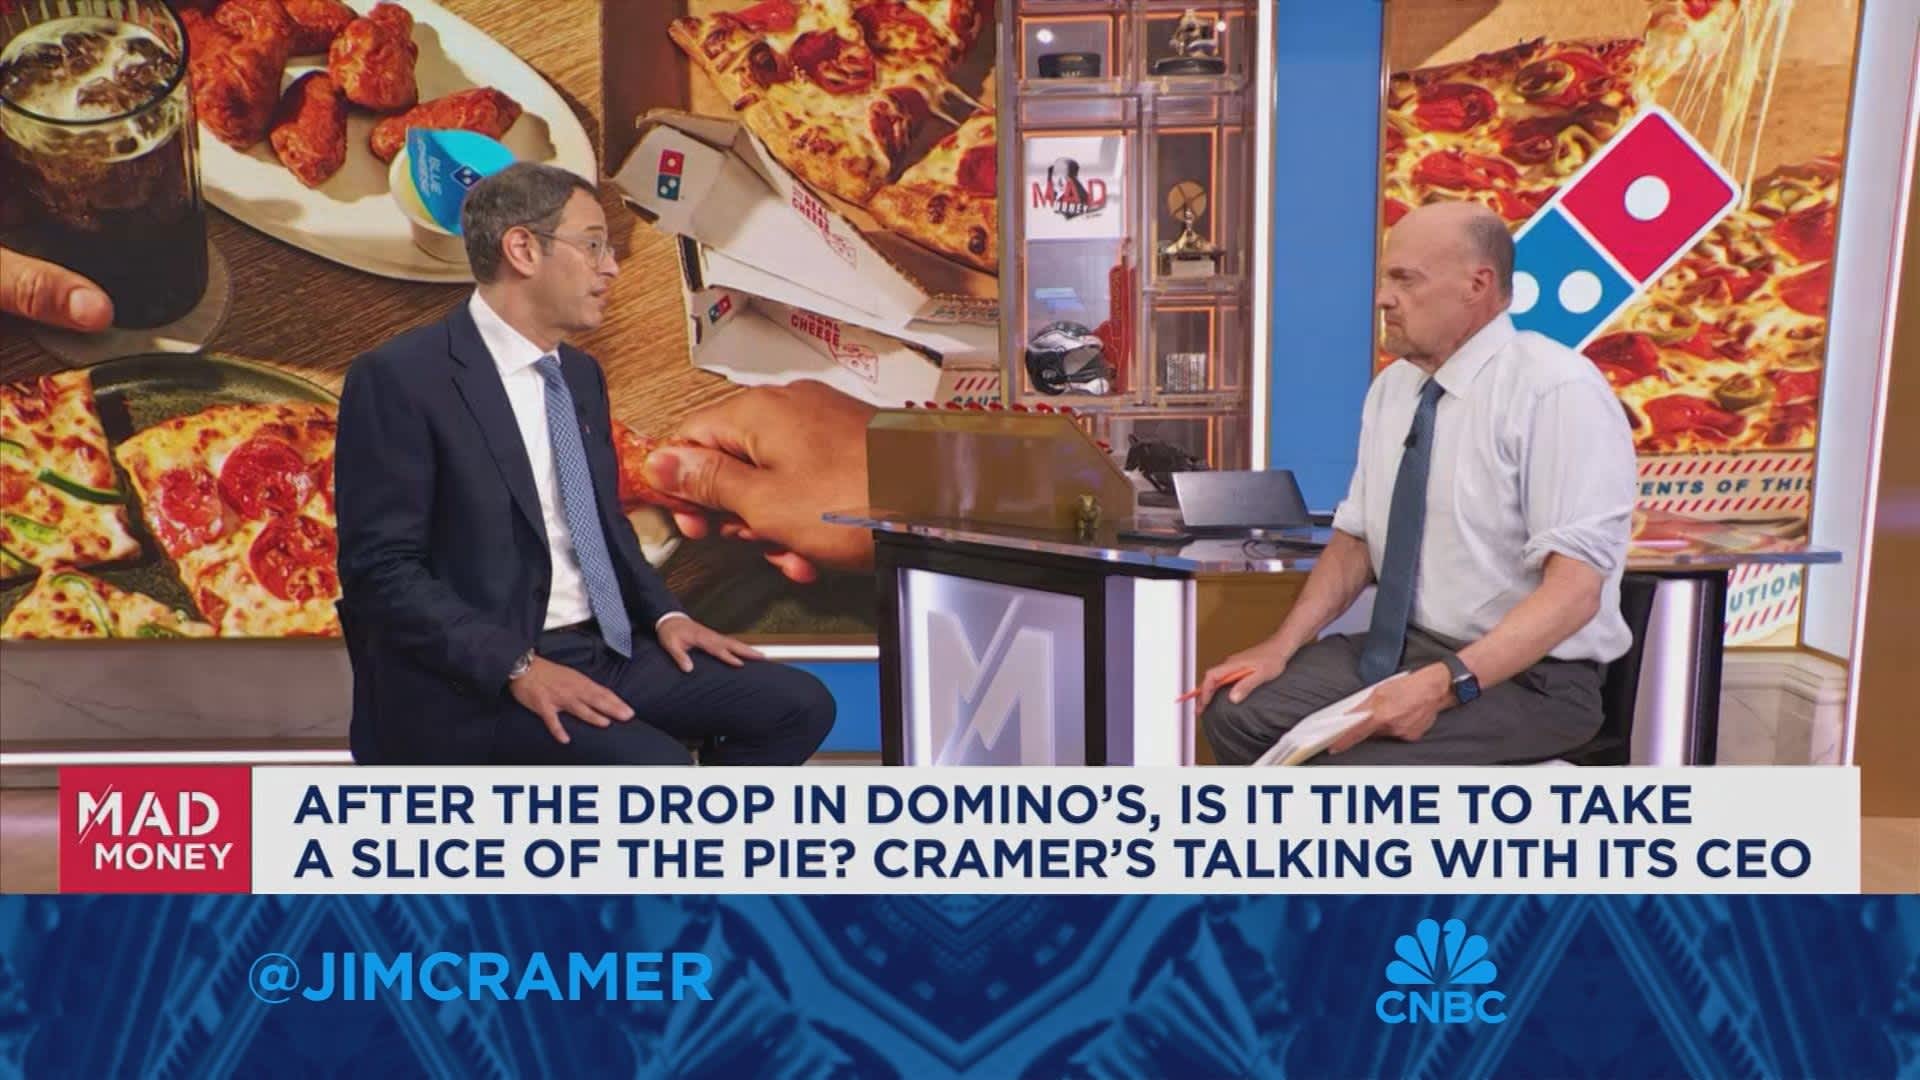 Domino's Pizza CEO Russell Weiner: Our job is to be consistent